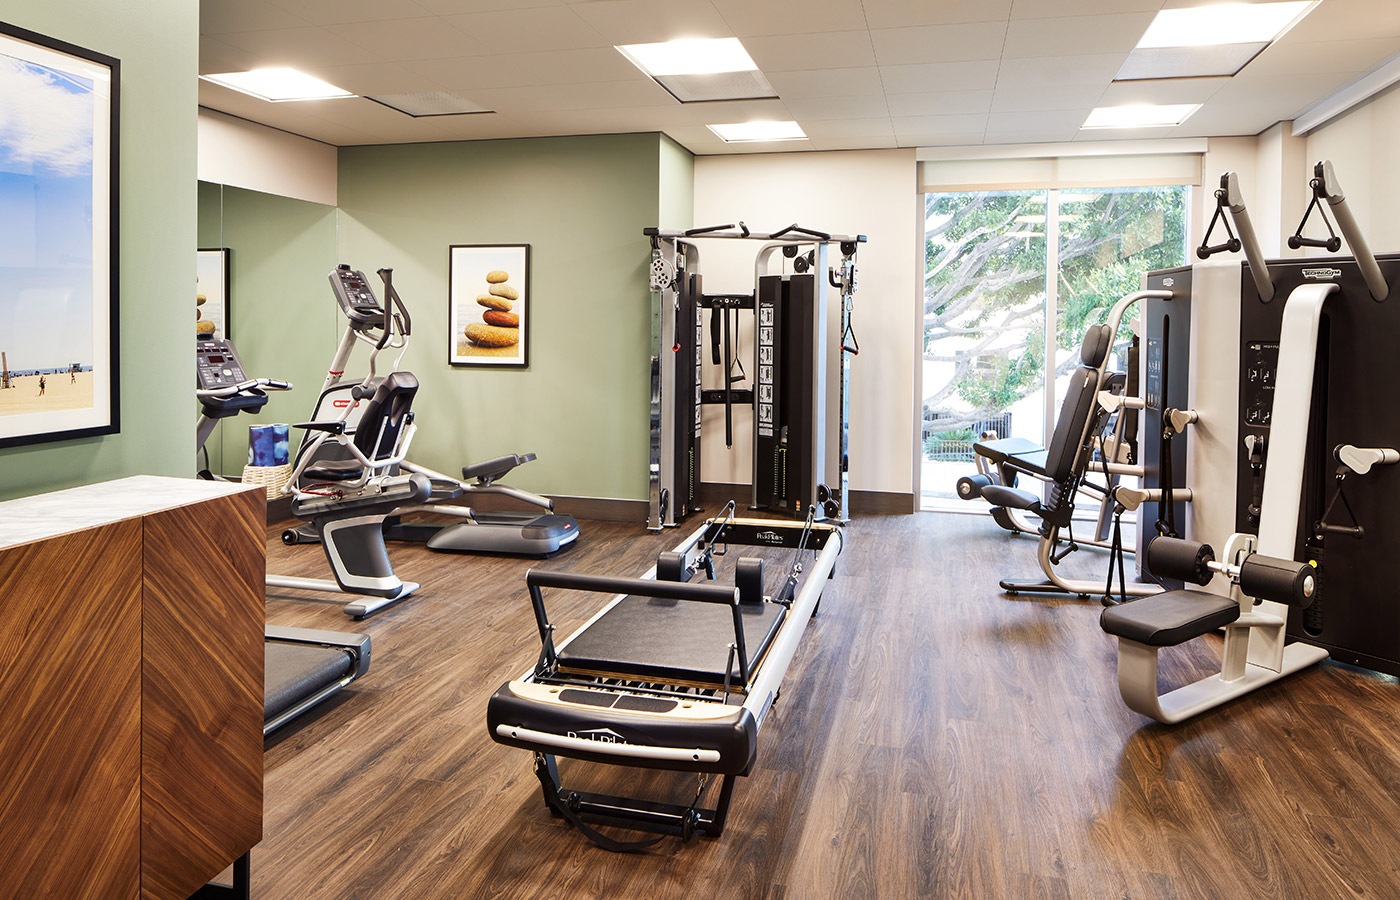 The fitness area at The Watermark at Westwood Village.